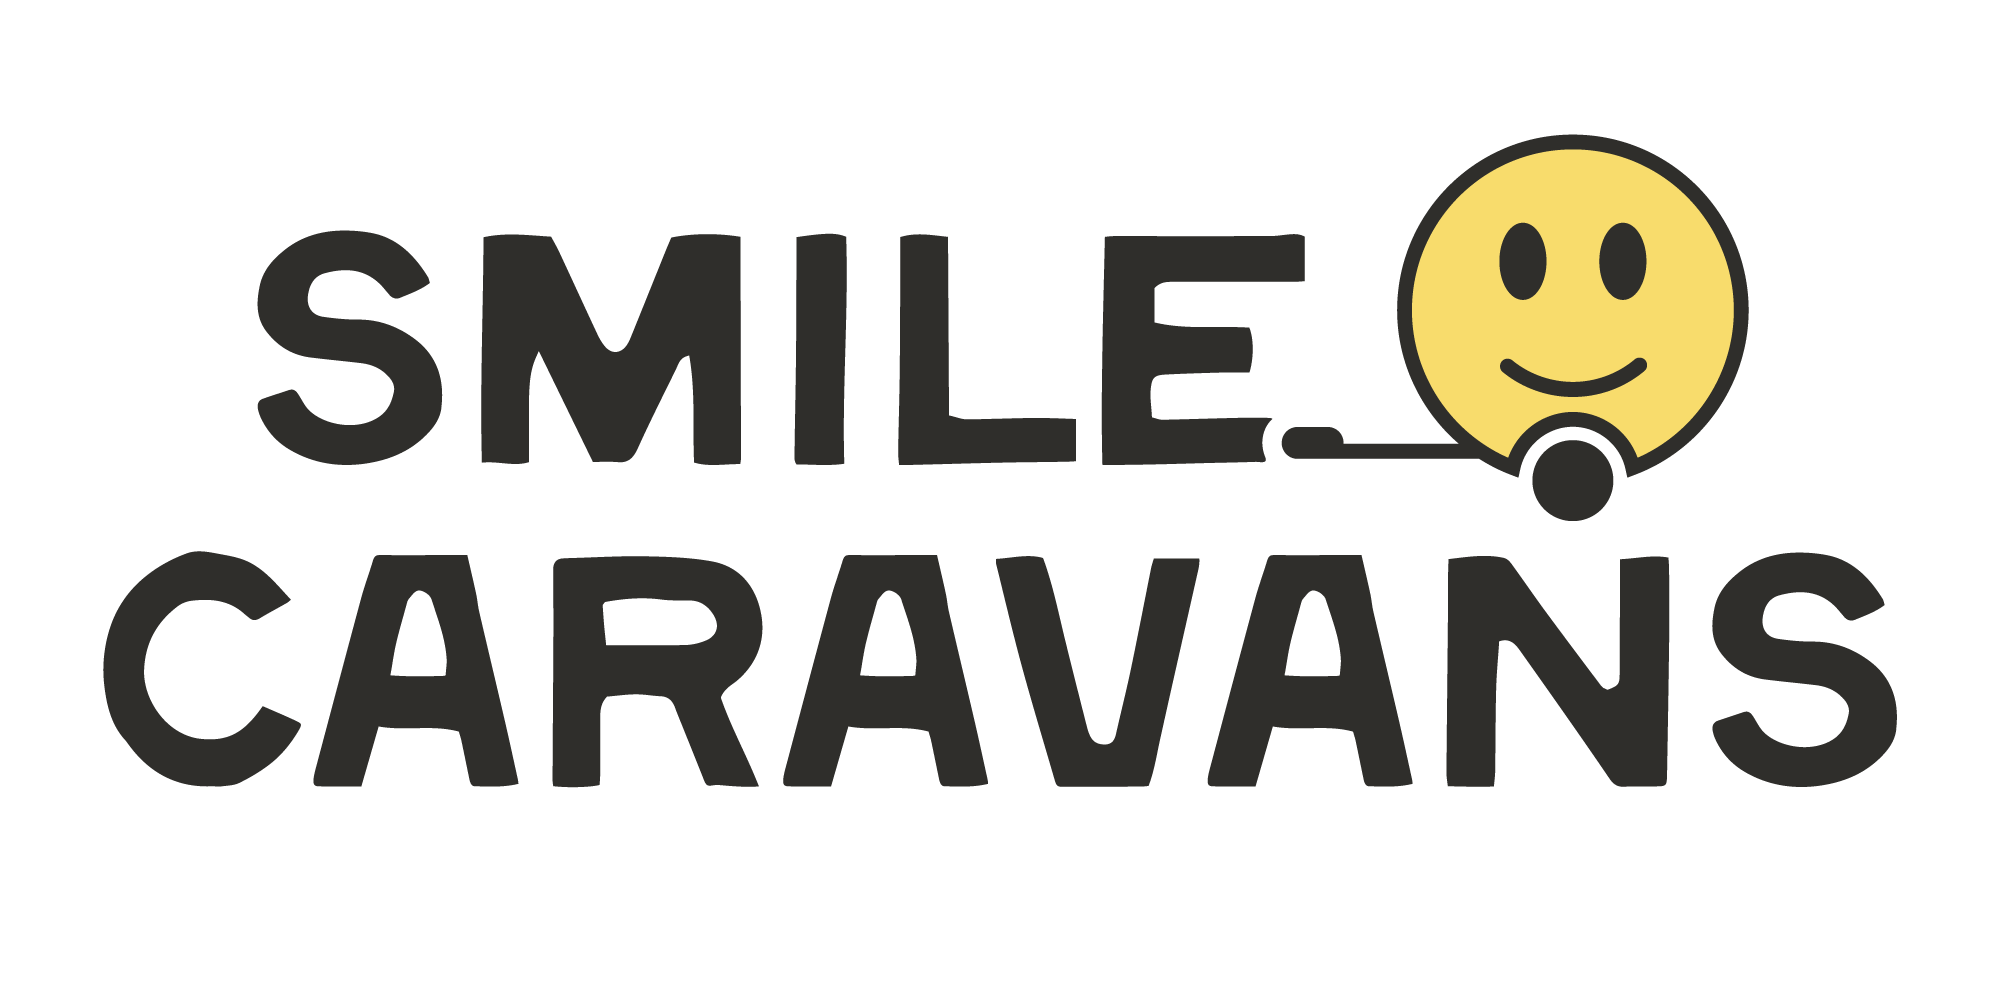 Smile Caravans logo in black letters, with simple icon of smiling caravan in black outline and yellow center